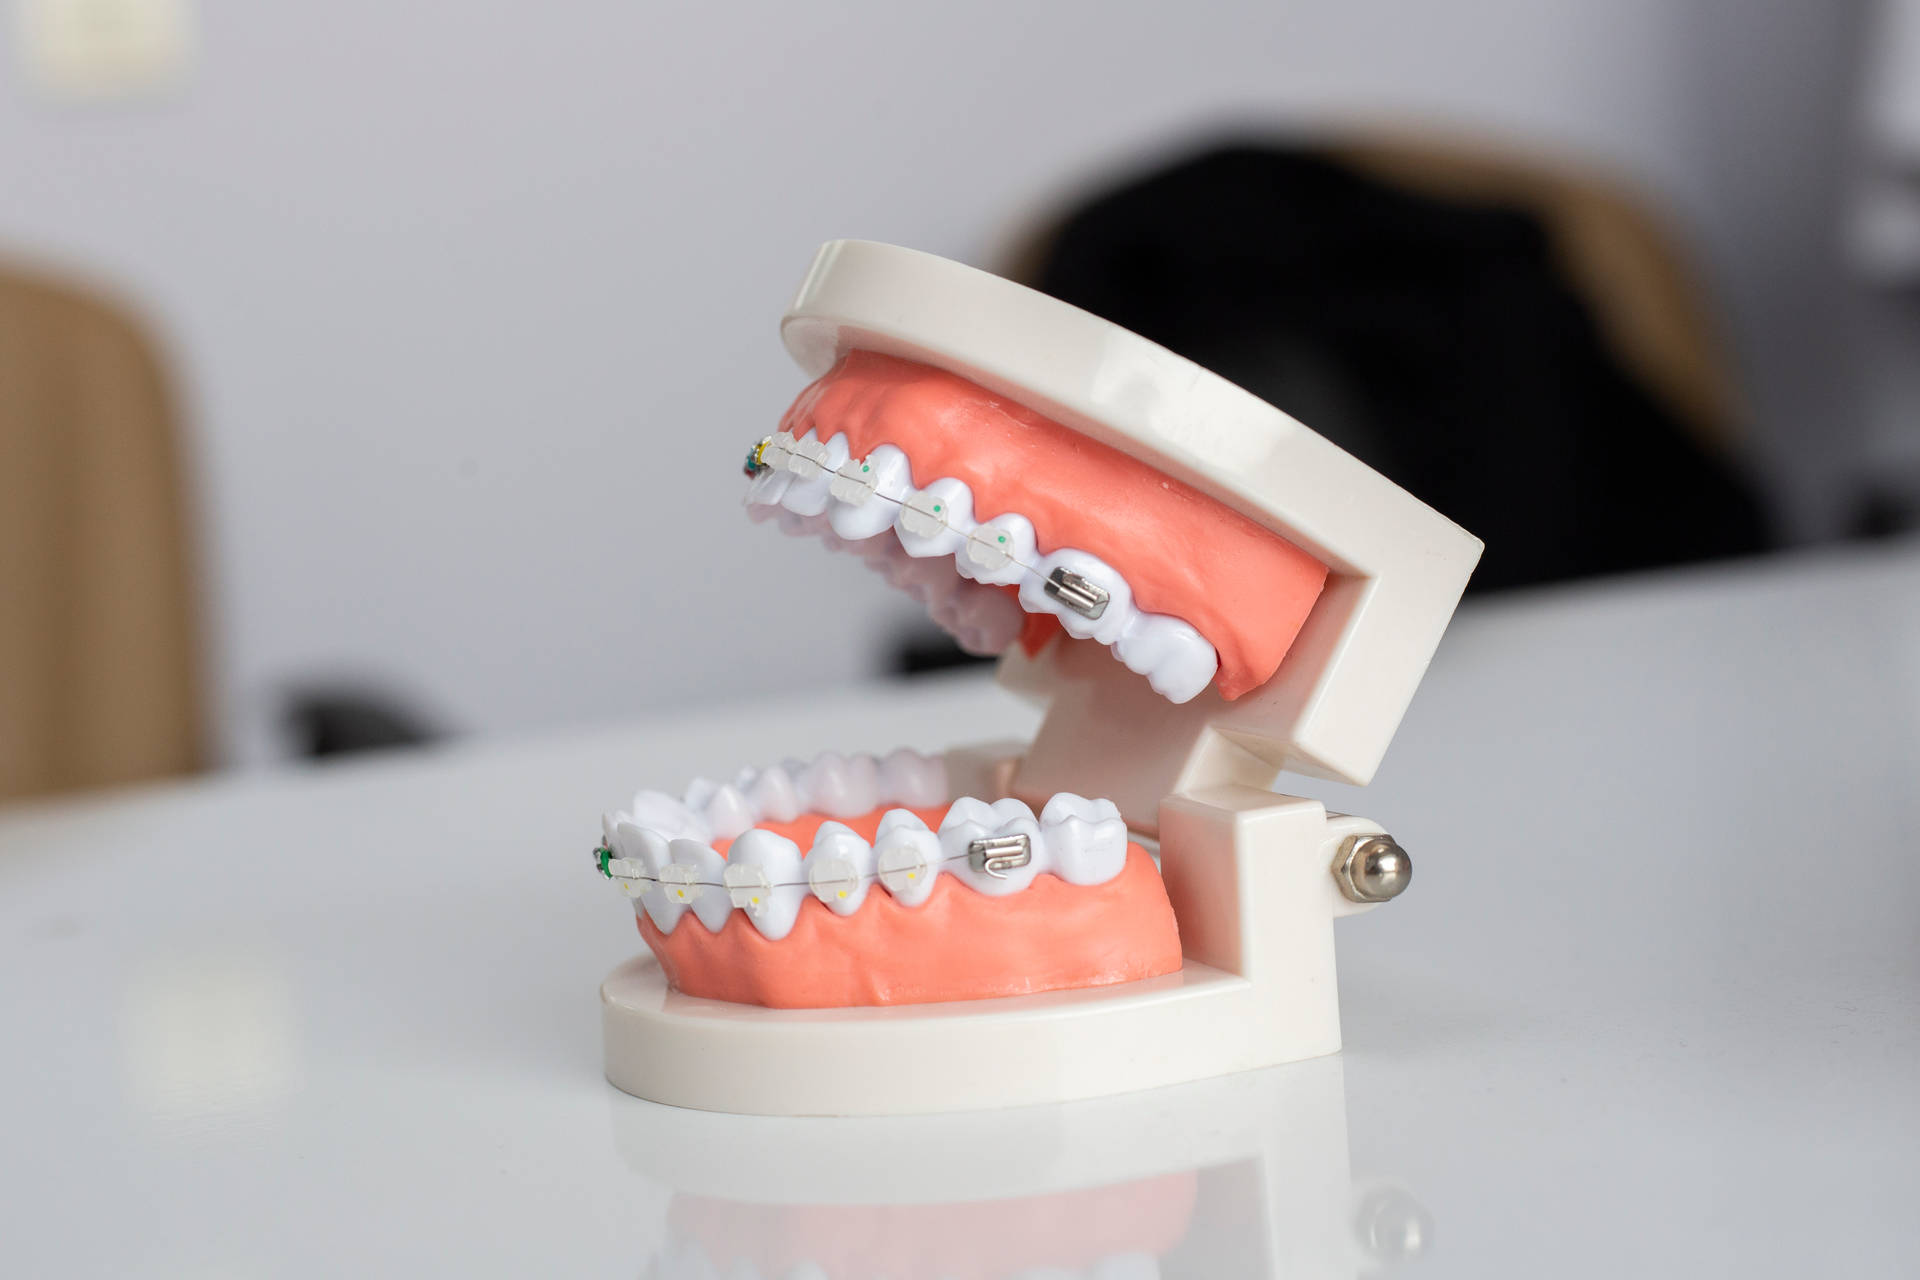 Dentistry Teeth Model With Braces Background